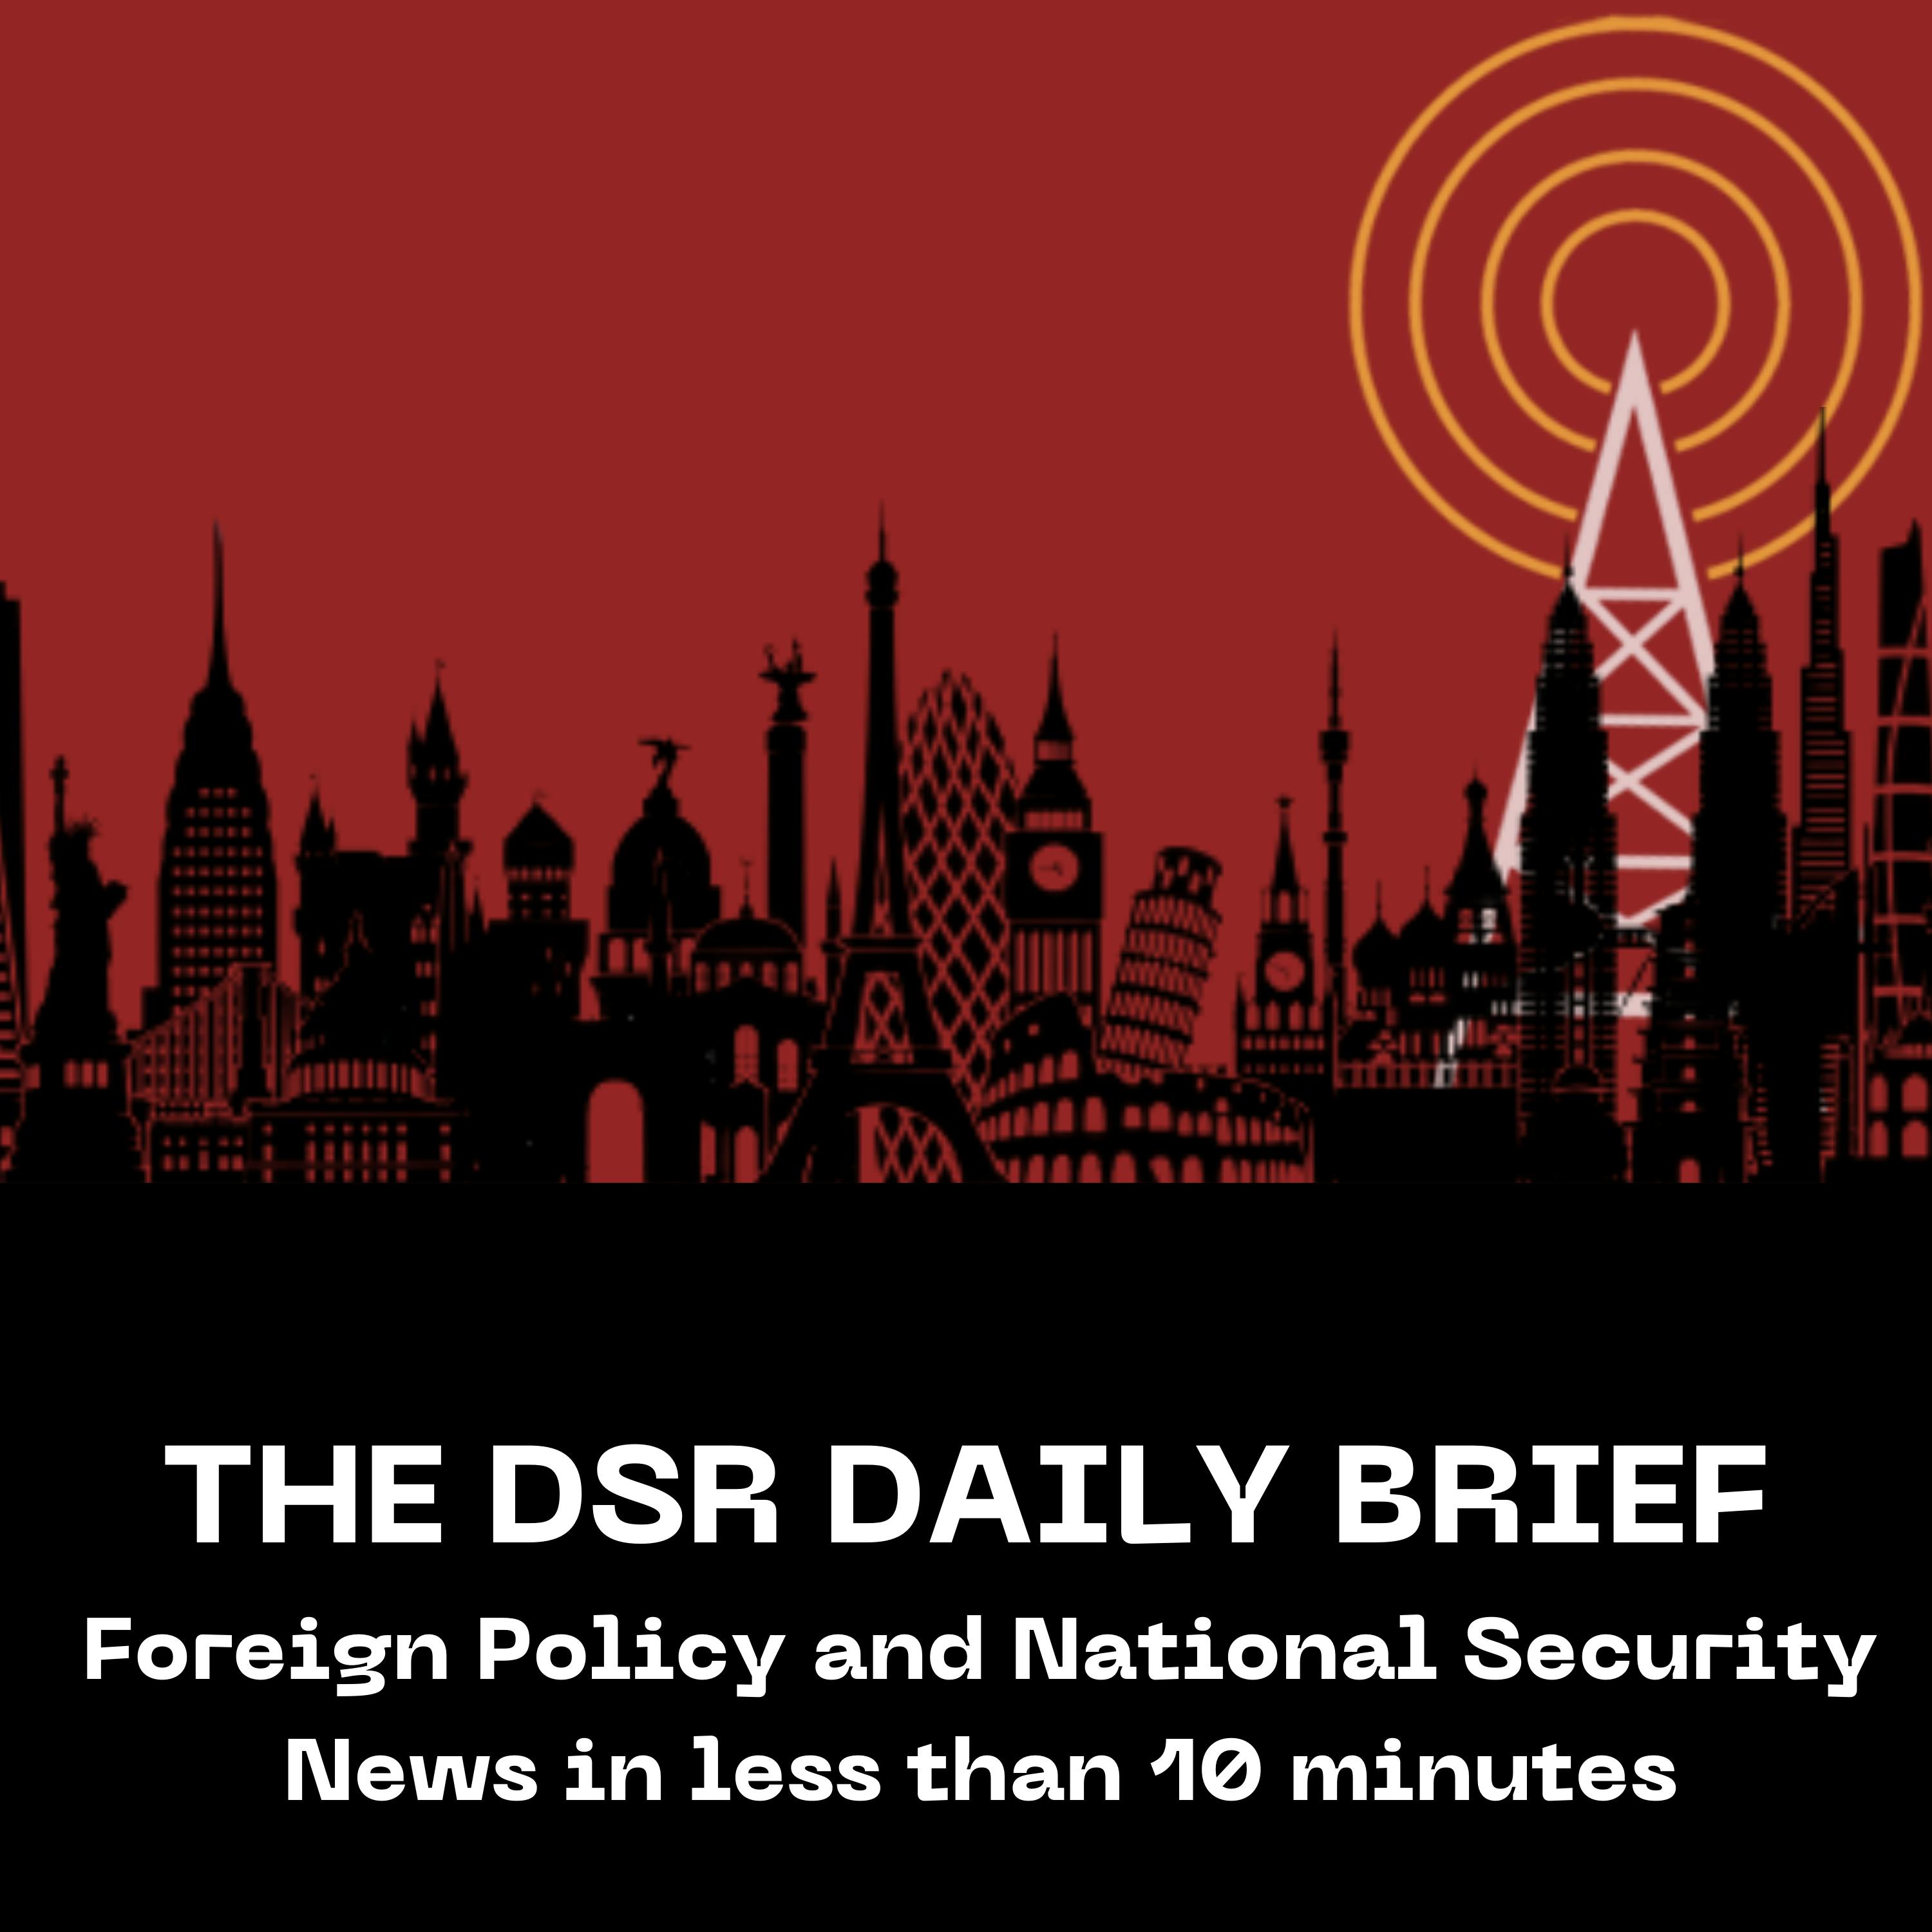 The DSR Daily for March 15: Schumer’s Speech Condemns Netanyahu, VP Harris visits Abortion Clinic in Historic First